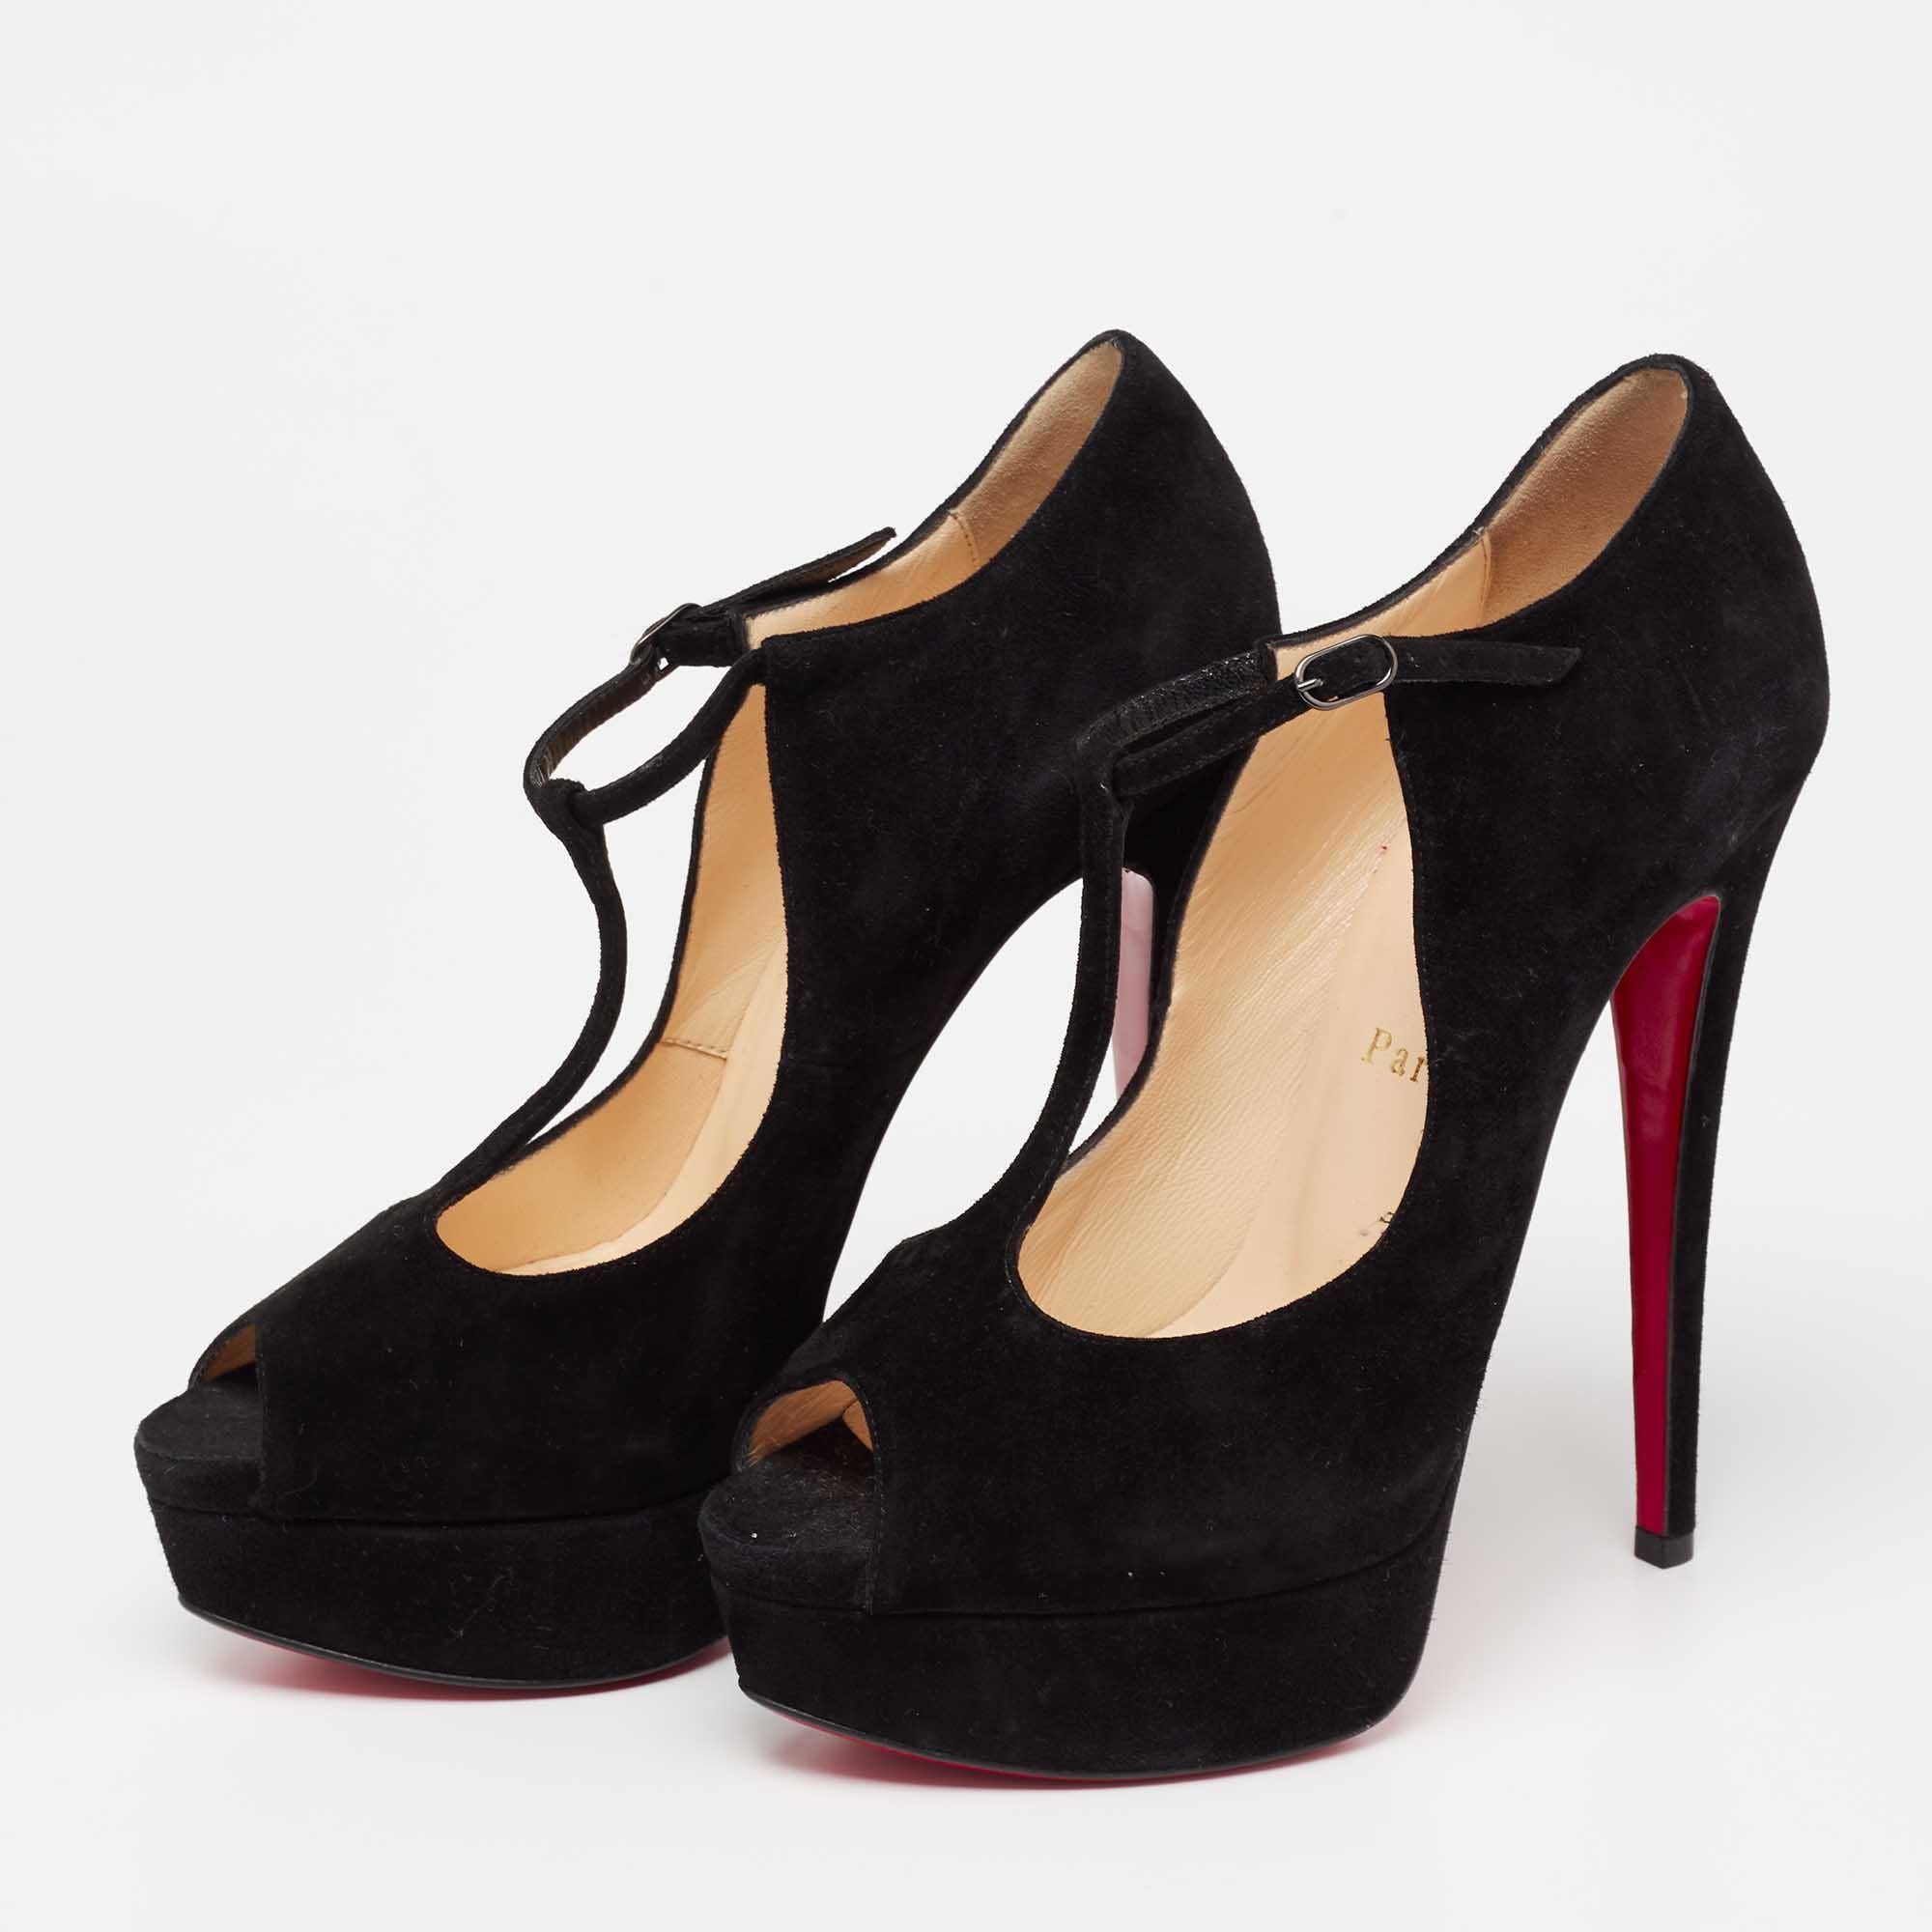 Christian Louboutin's feminine and classy pair of black T-strap pumps are made from smooth suede. The pair features a peep-toe style with peep-toes. The Alta Poppins pumps have comfortable leather-lined insoles. Pair this up with dresses for a dose